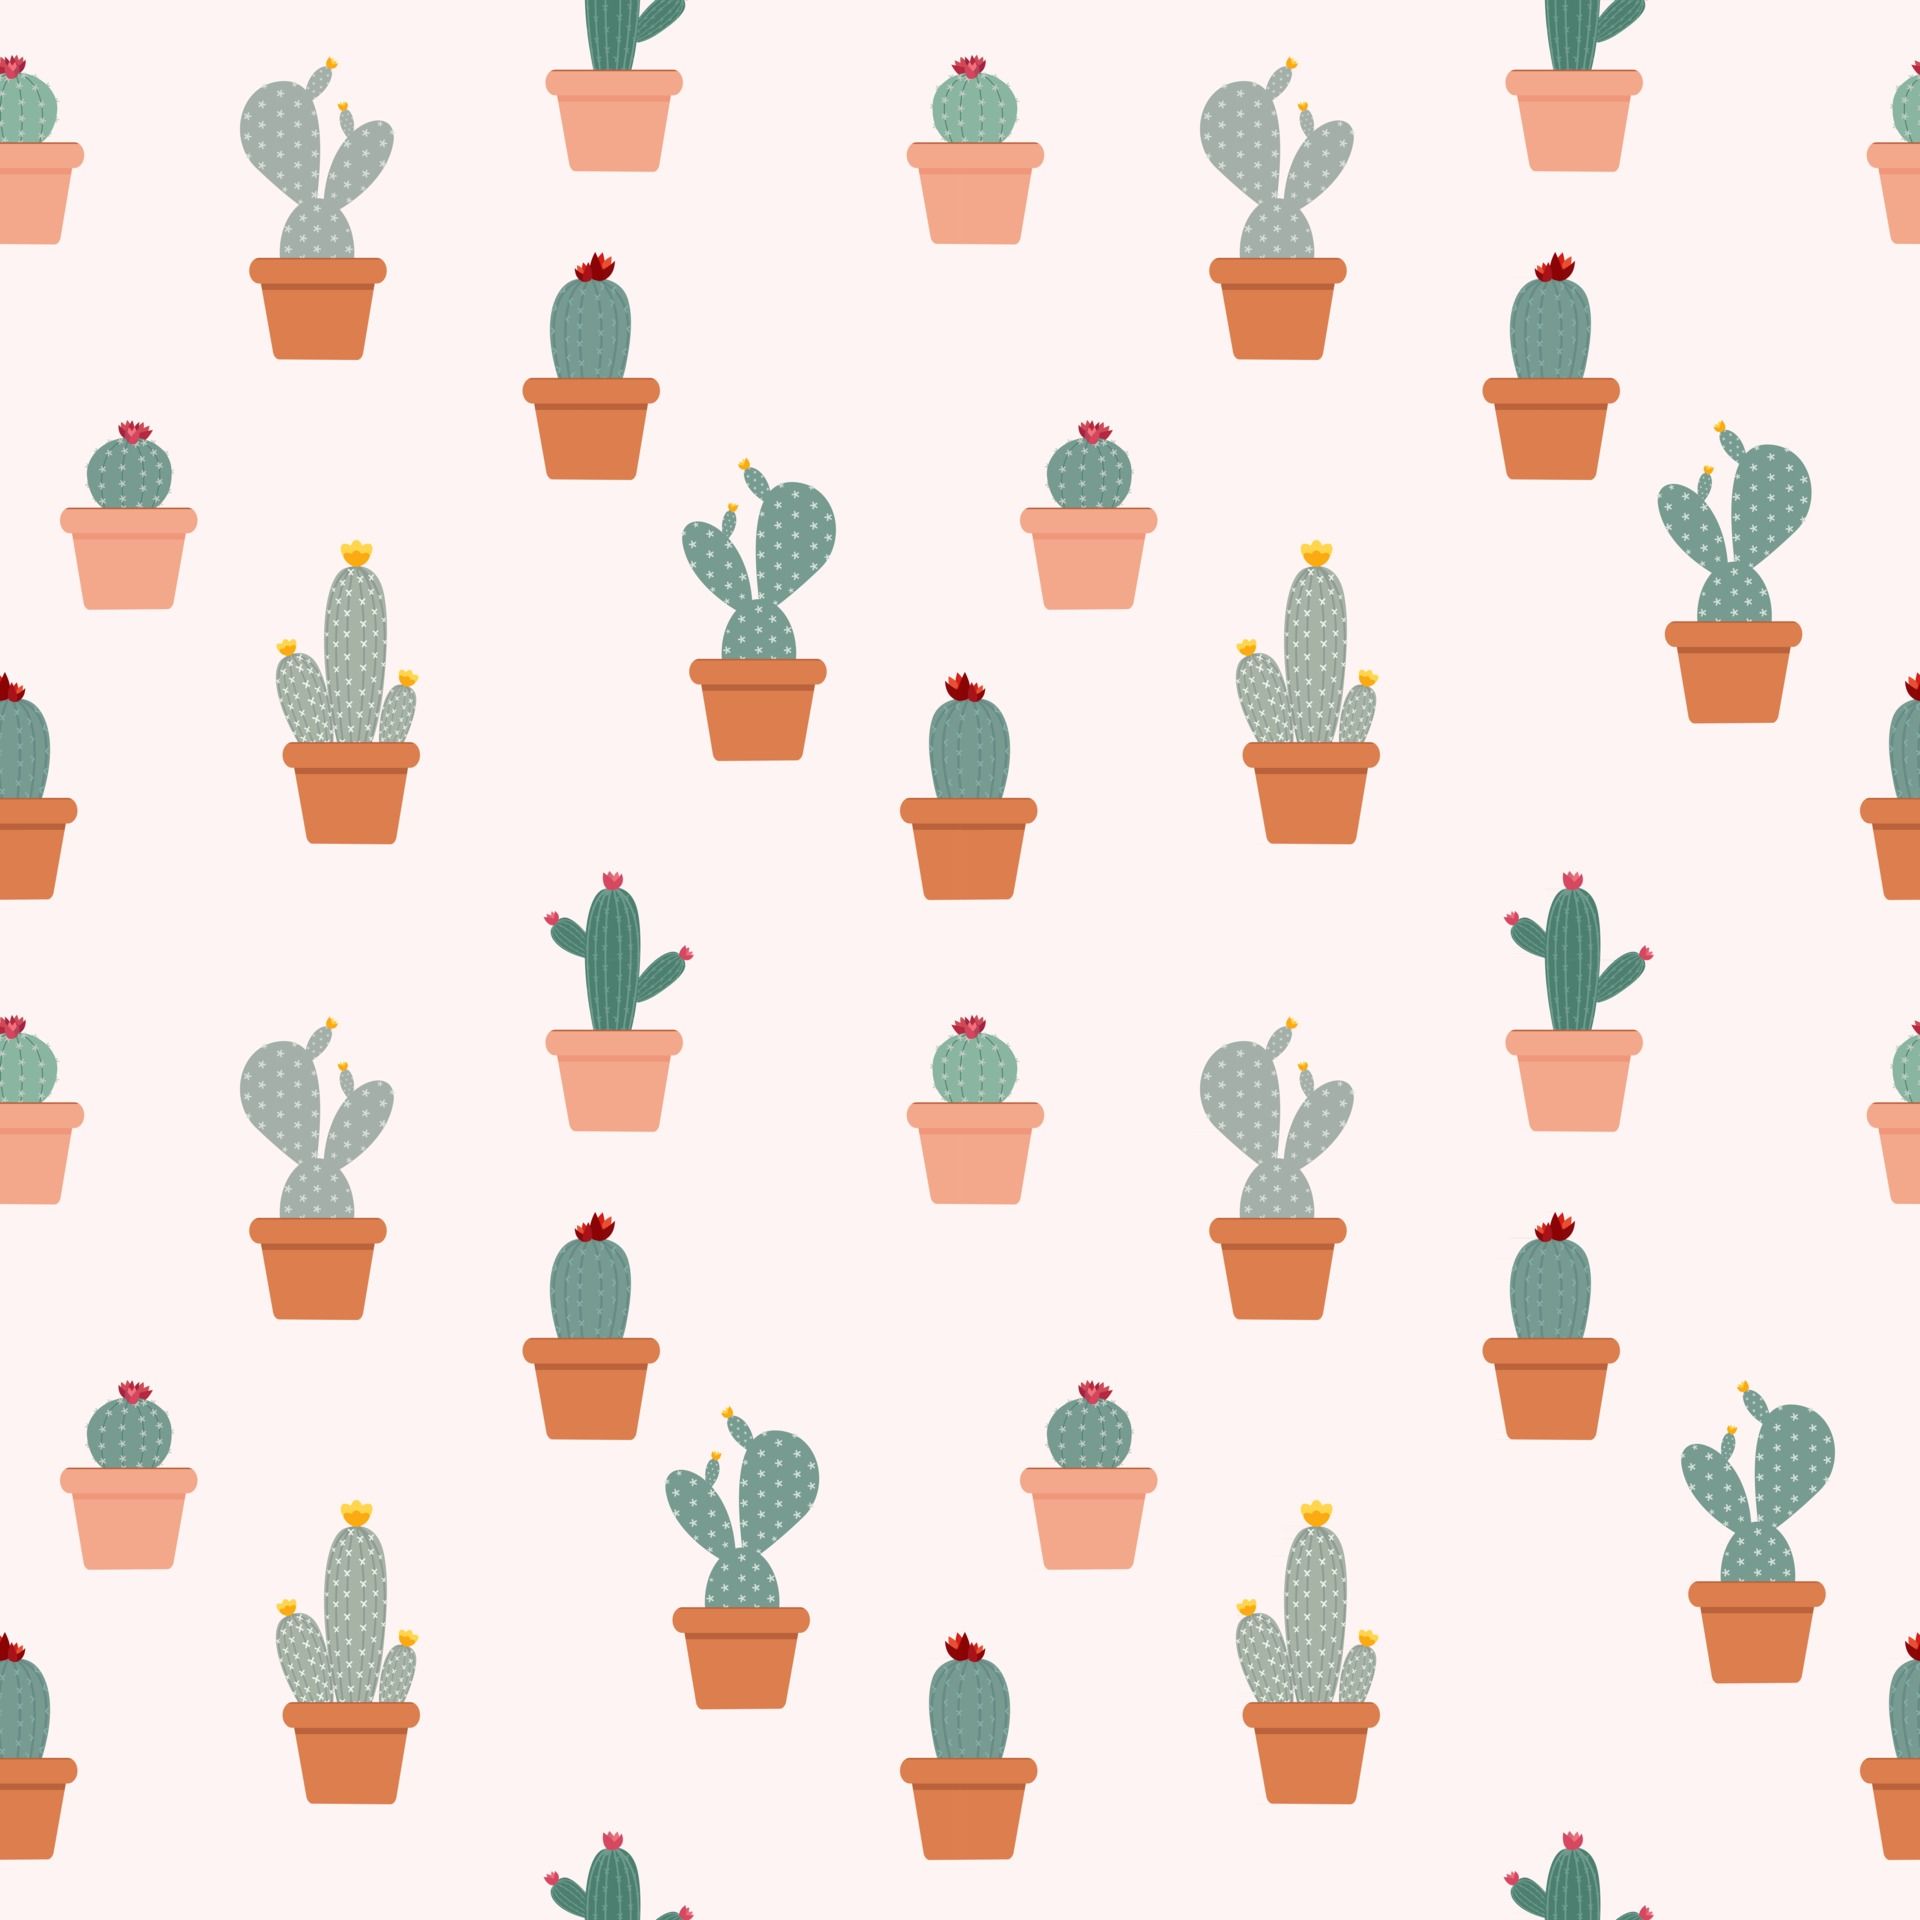 Cactus Natural Seamless Pattern Background Vector Illustration